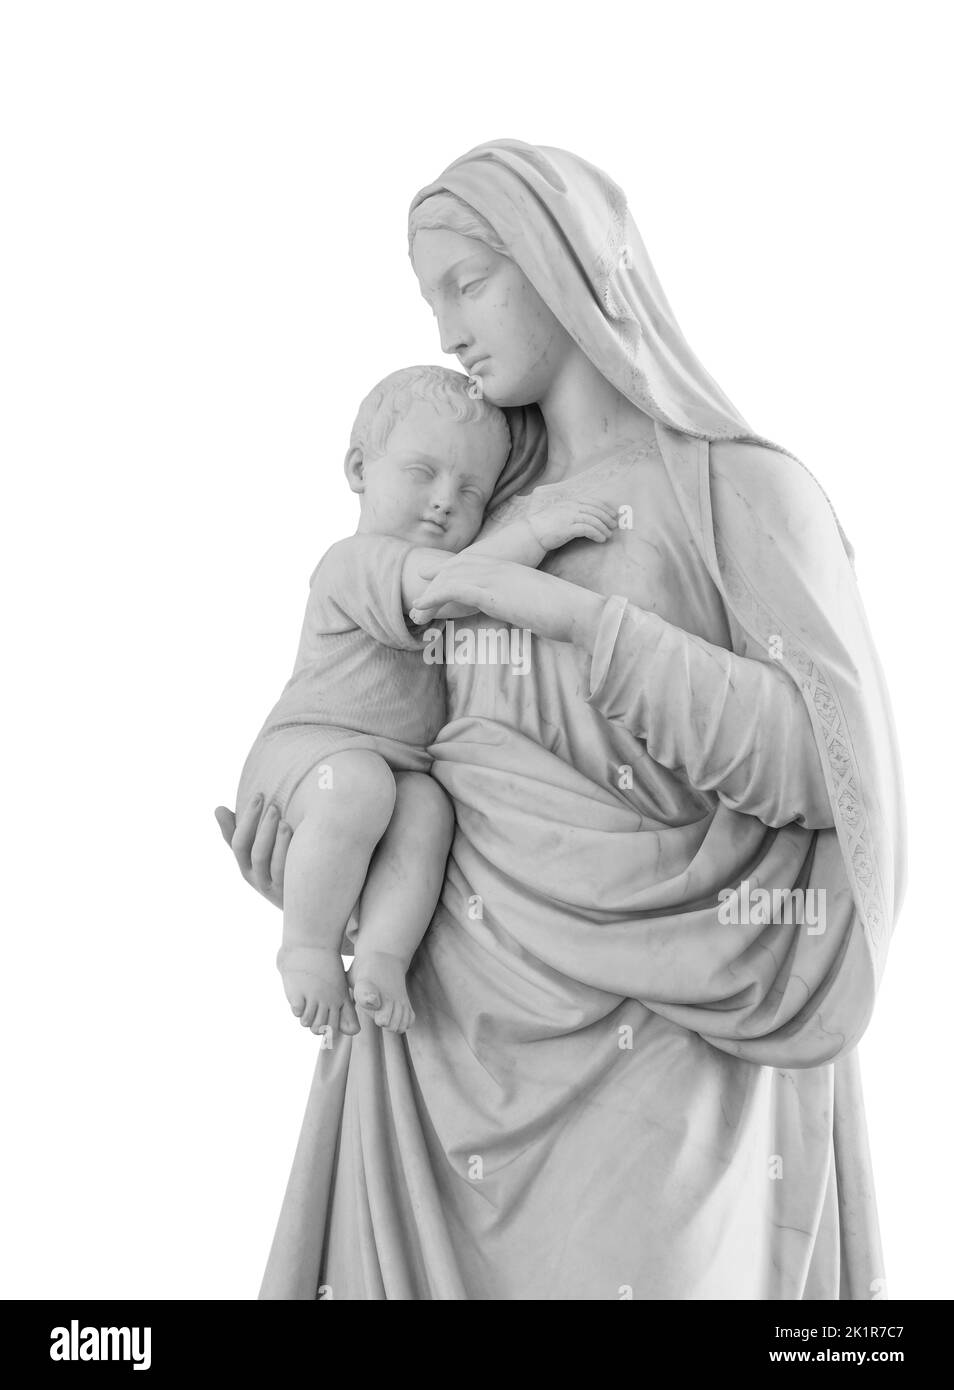 Virgin Mary and child Christ in her arms statue isolated on white background with clipping path. Madonna with baby sculpture Stock Photo